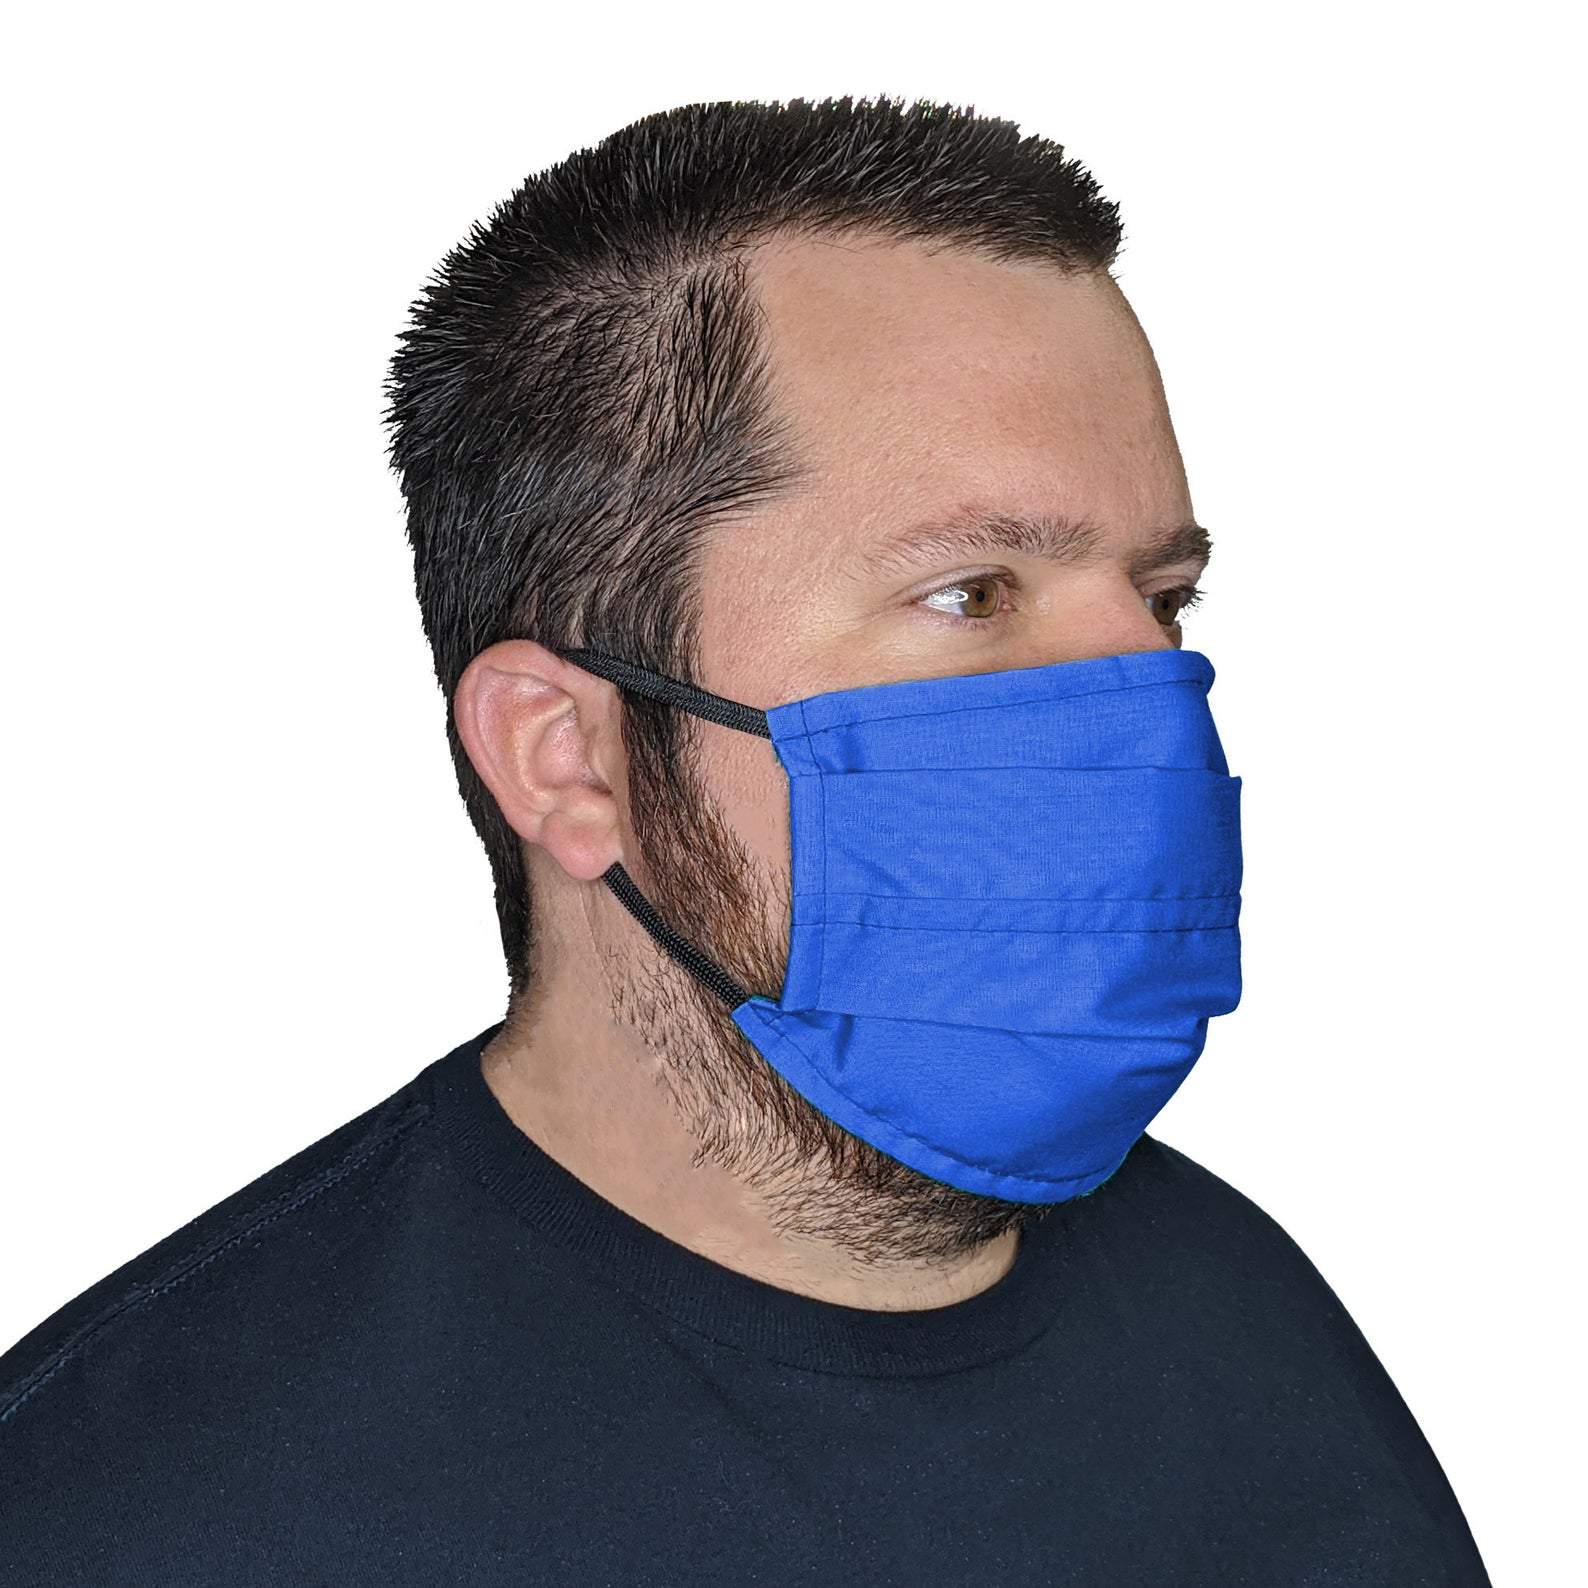 XXL Face Mask- Reusable & Washable with Cotton Blend Fabric Face Mask Square Up Fashions Royal Blue 1 Individual 